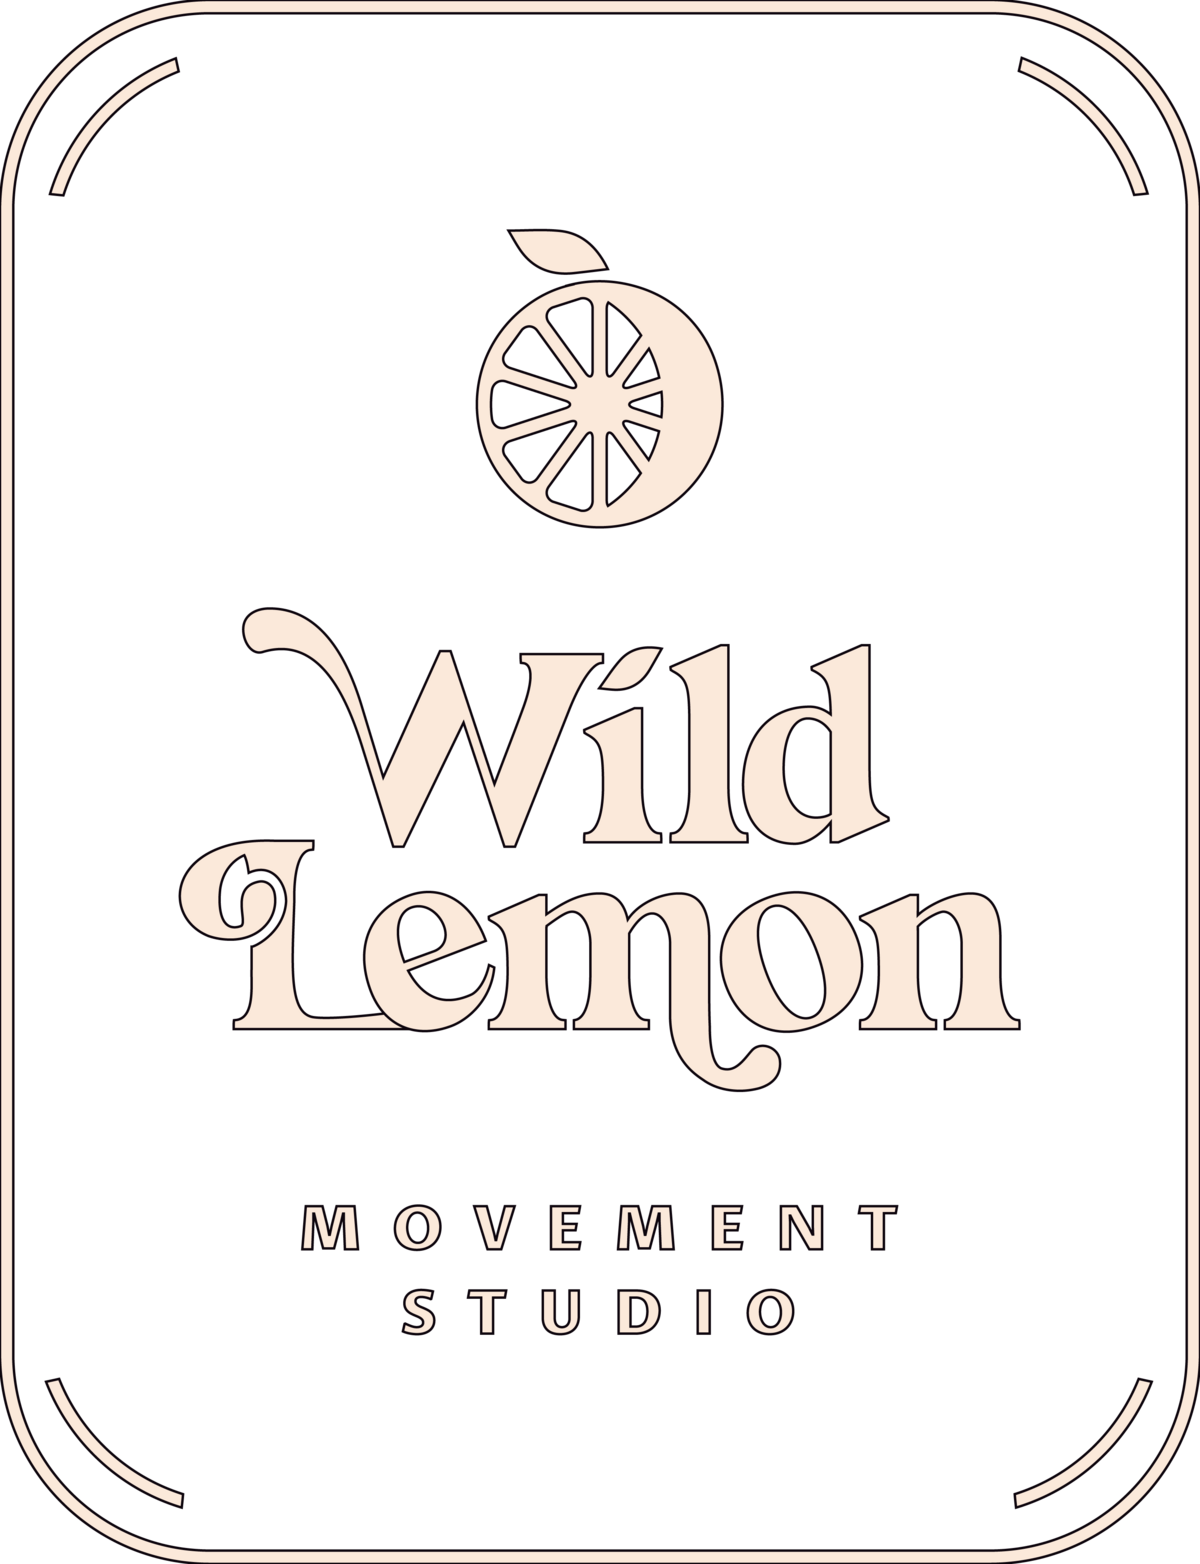 WL Movement studio stacked sign - cloud